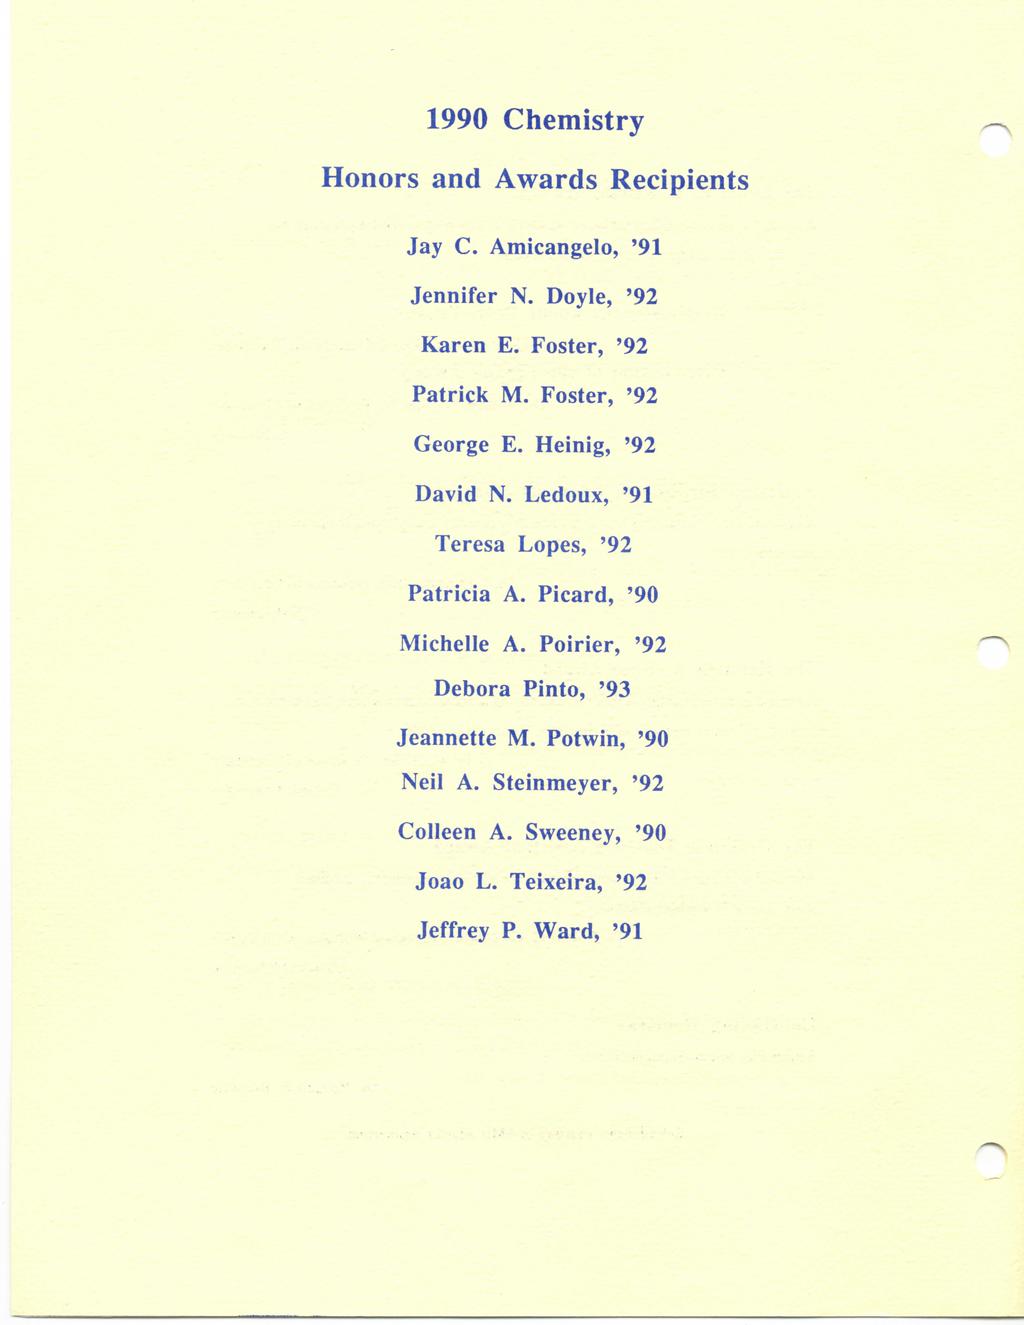 1990 Chemistry Honors and Awards Recipients Jay C. Amicangelo, '91 Jennifer N. Doyle, '92 Karen E. Foster, '92 Patrick M. Foster, '92 George E. Heinig, '92 David N.